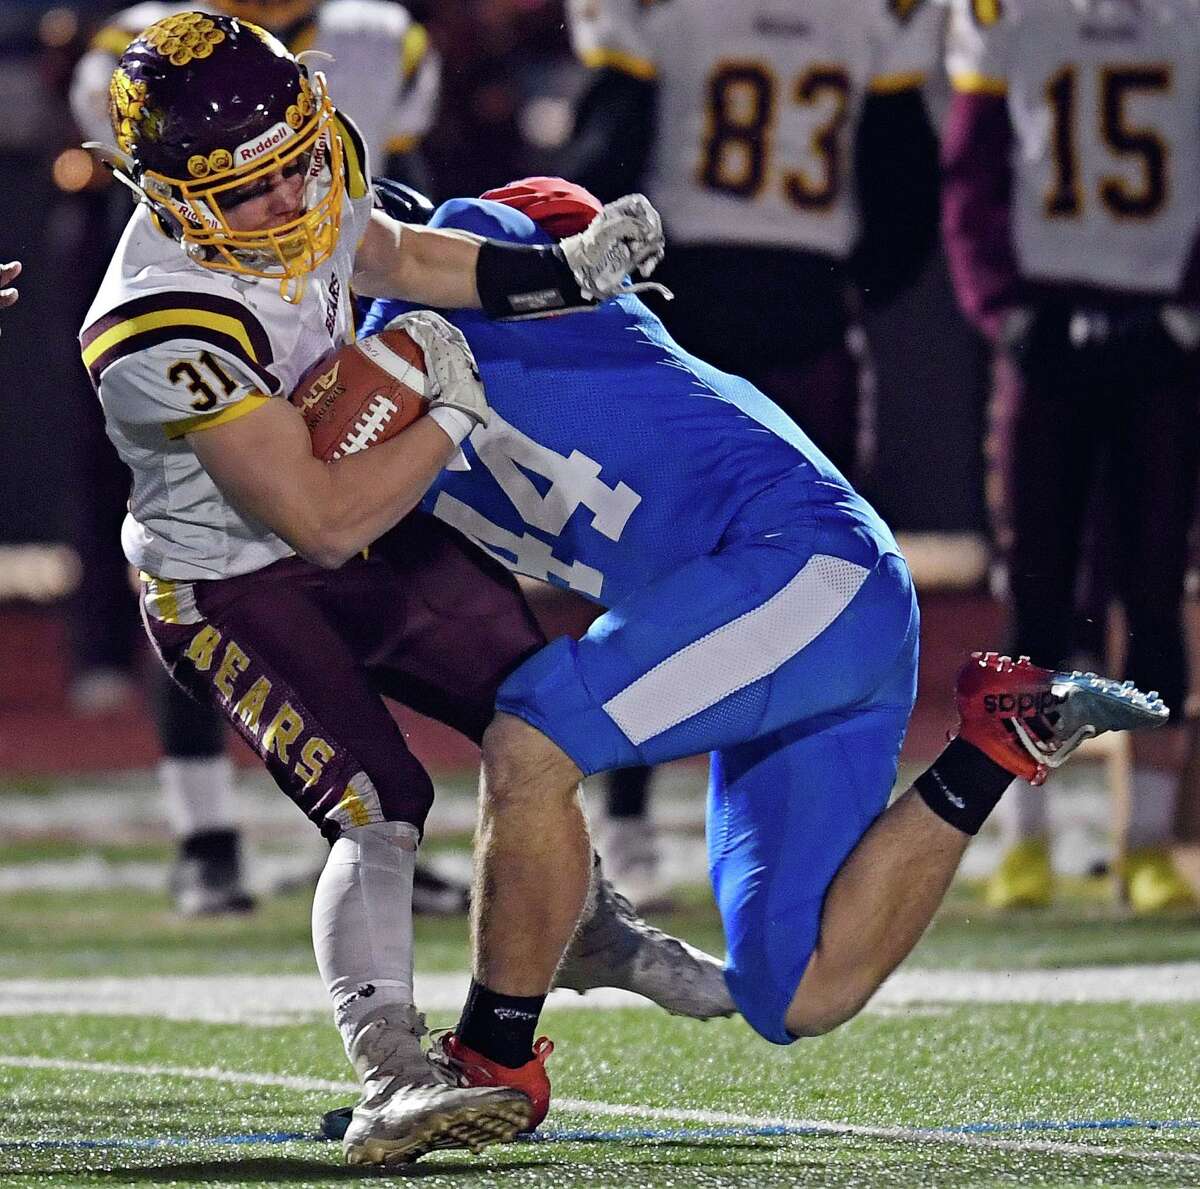 12/4/19 :: SPORTS :: DIMAURO :: Waterford's Jackson Harshberger (44) tackles Granby/Canton's Sam Schock (31) in CIAC Class M football quarterfinal action Wednesday, December 4, 2019. (Sean D. Elliot/The Day)